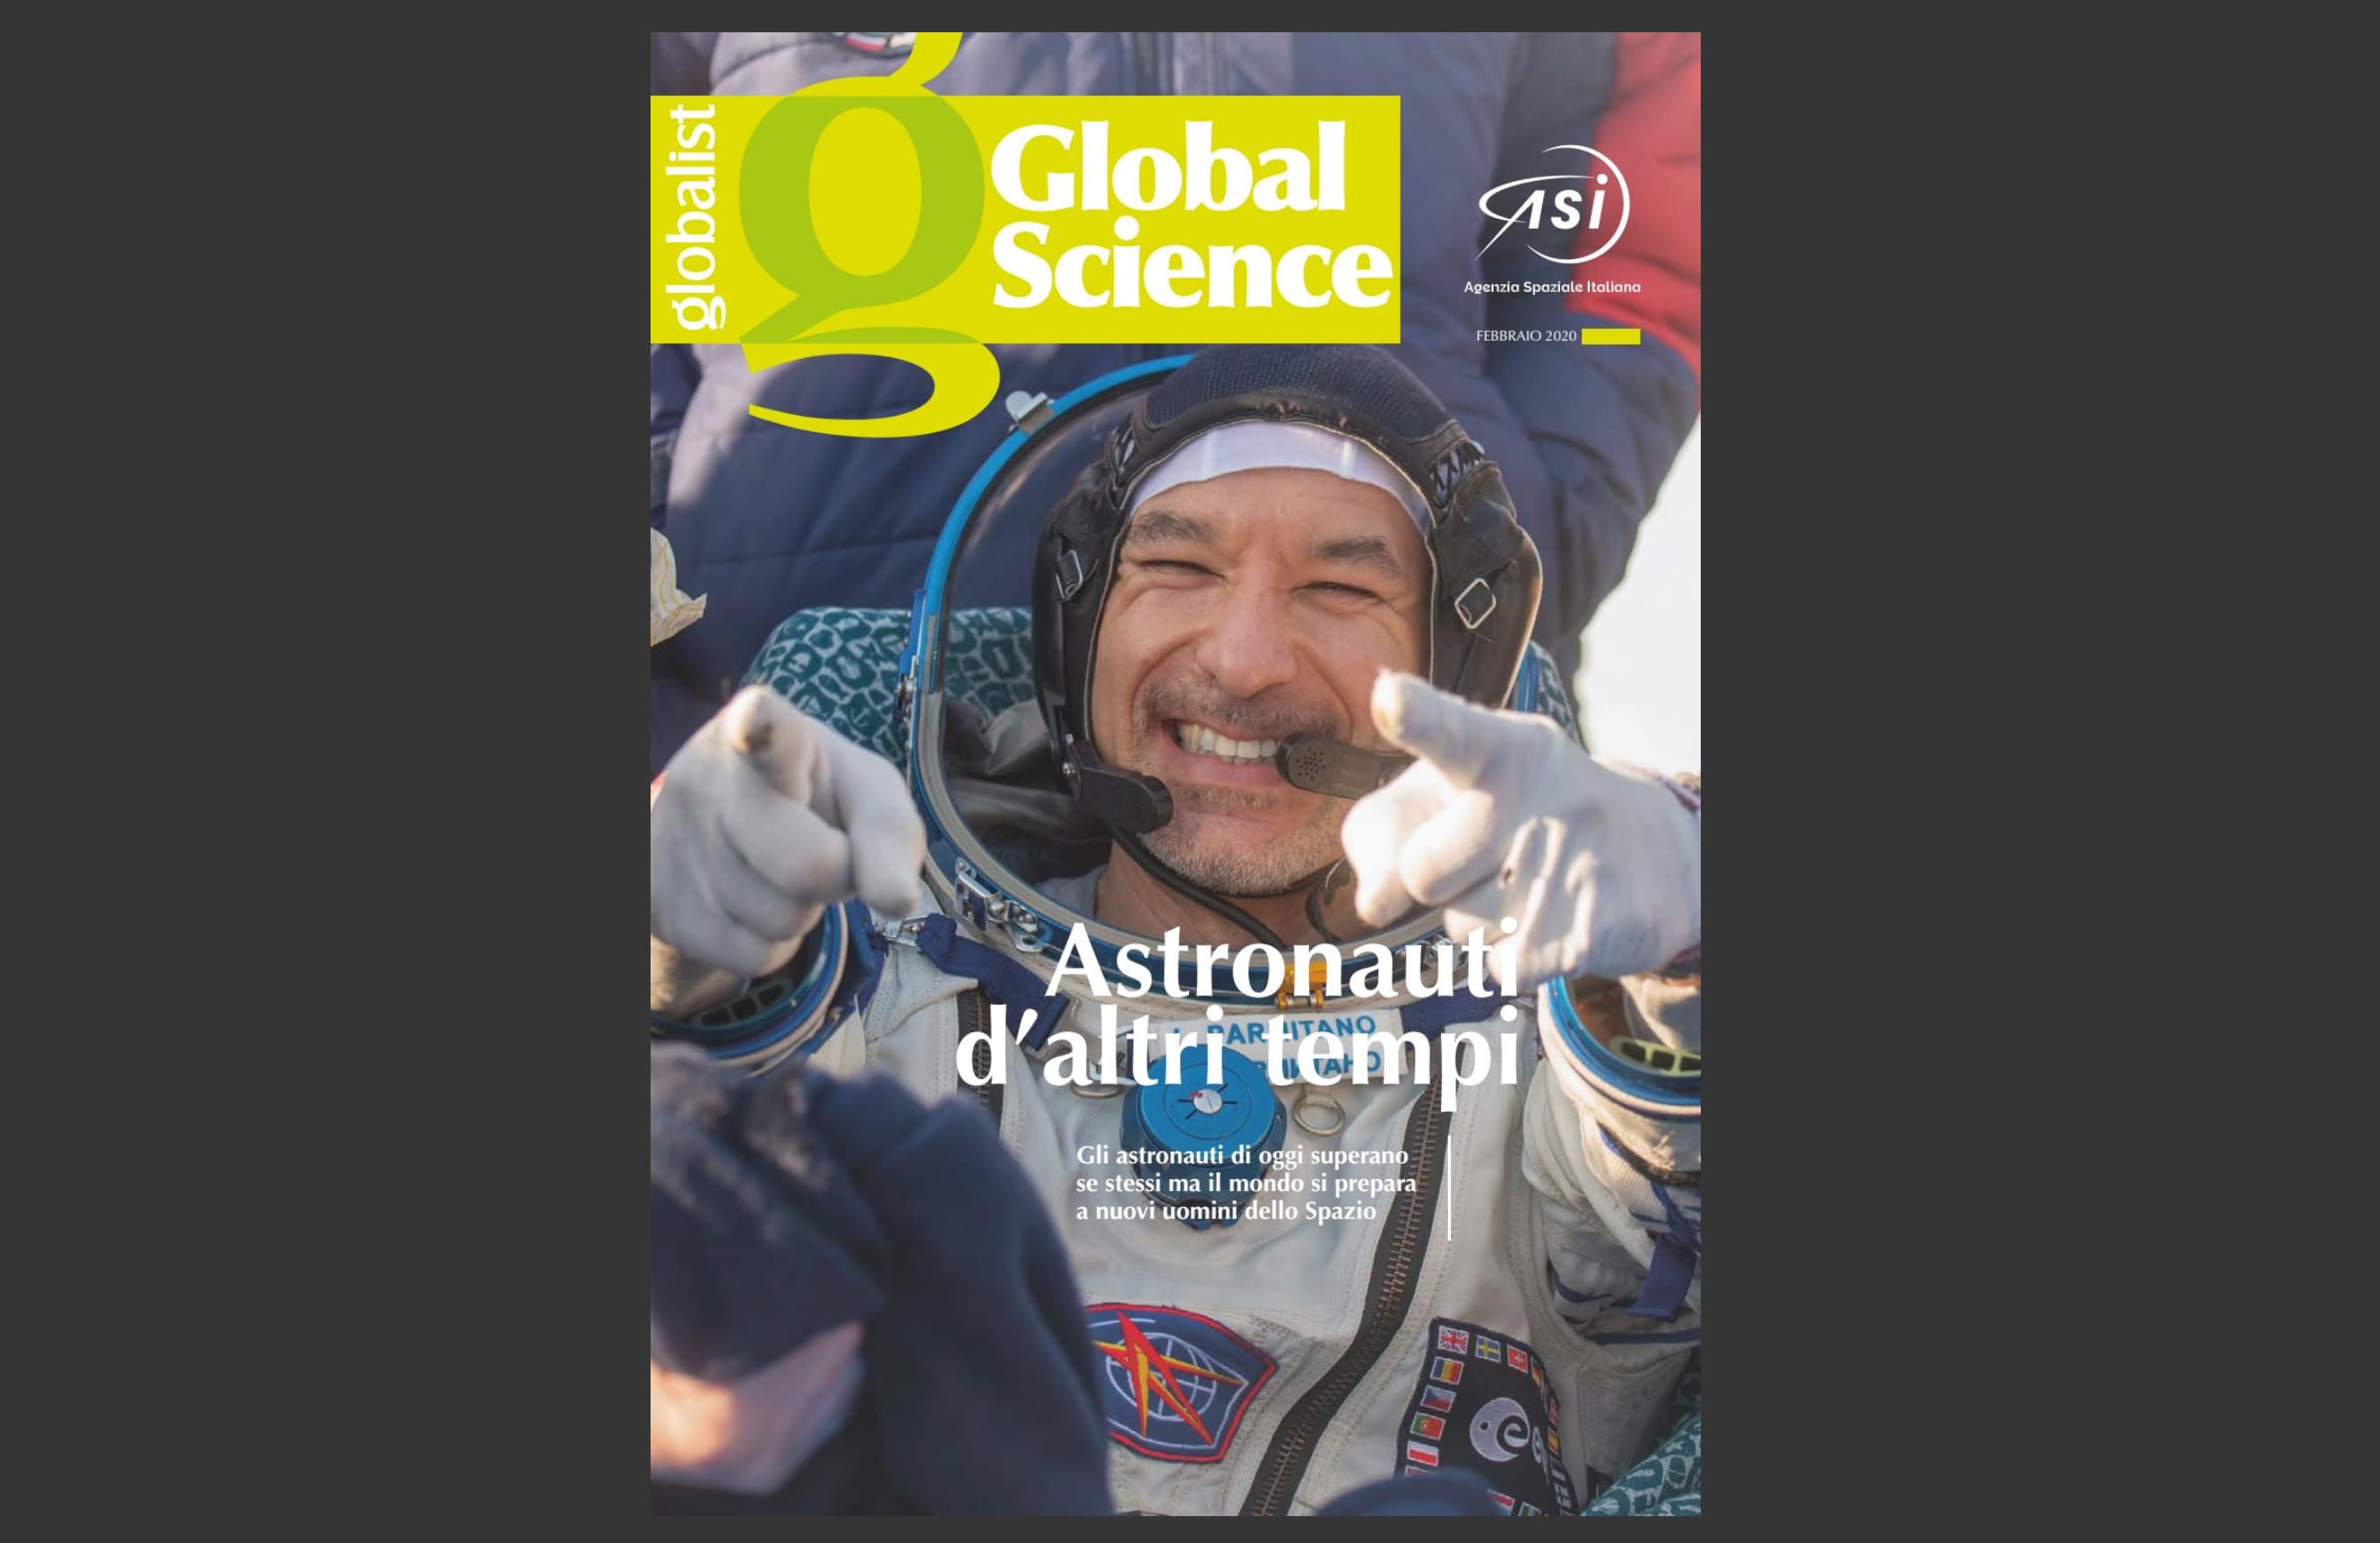 ASI - Global Science – The magazine